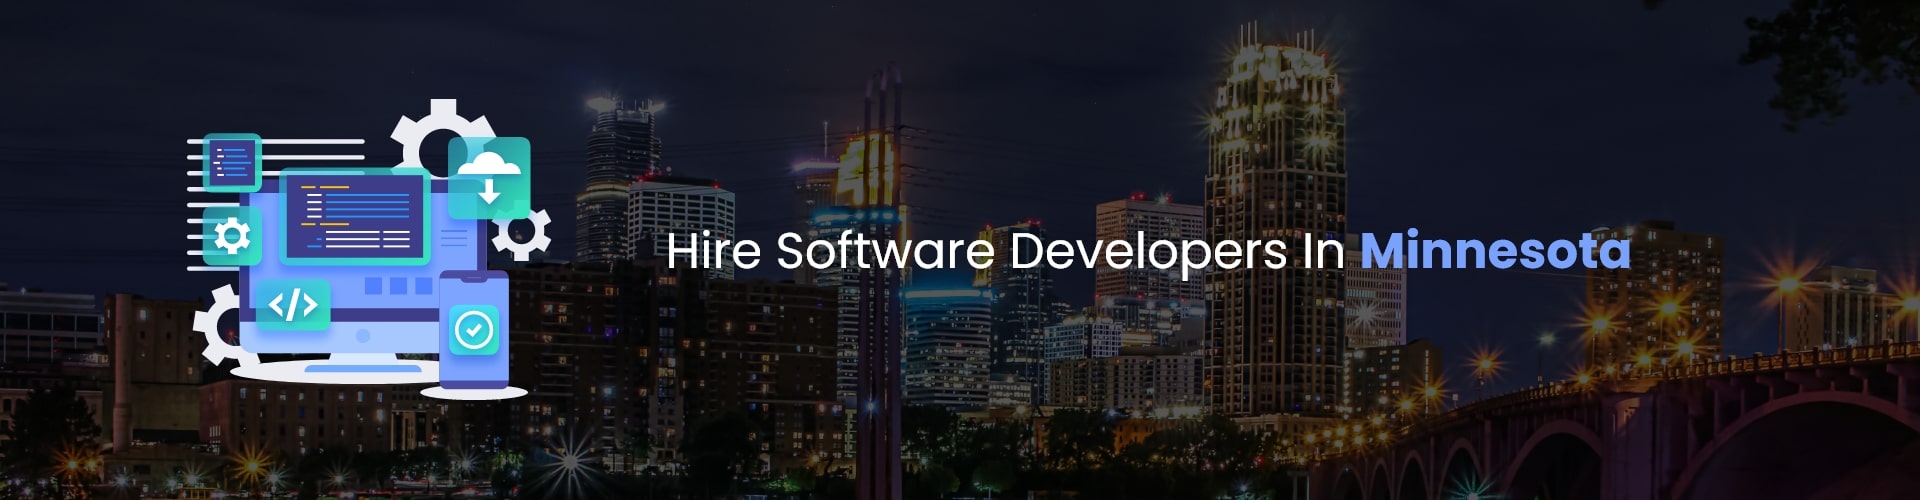 hire software developers in minnesota